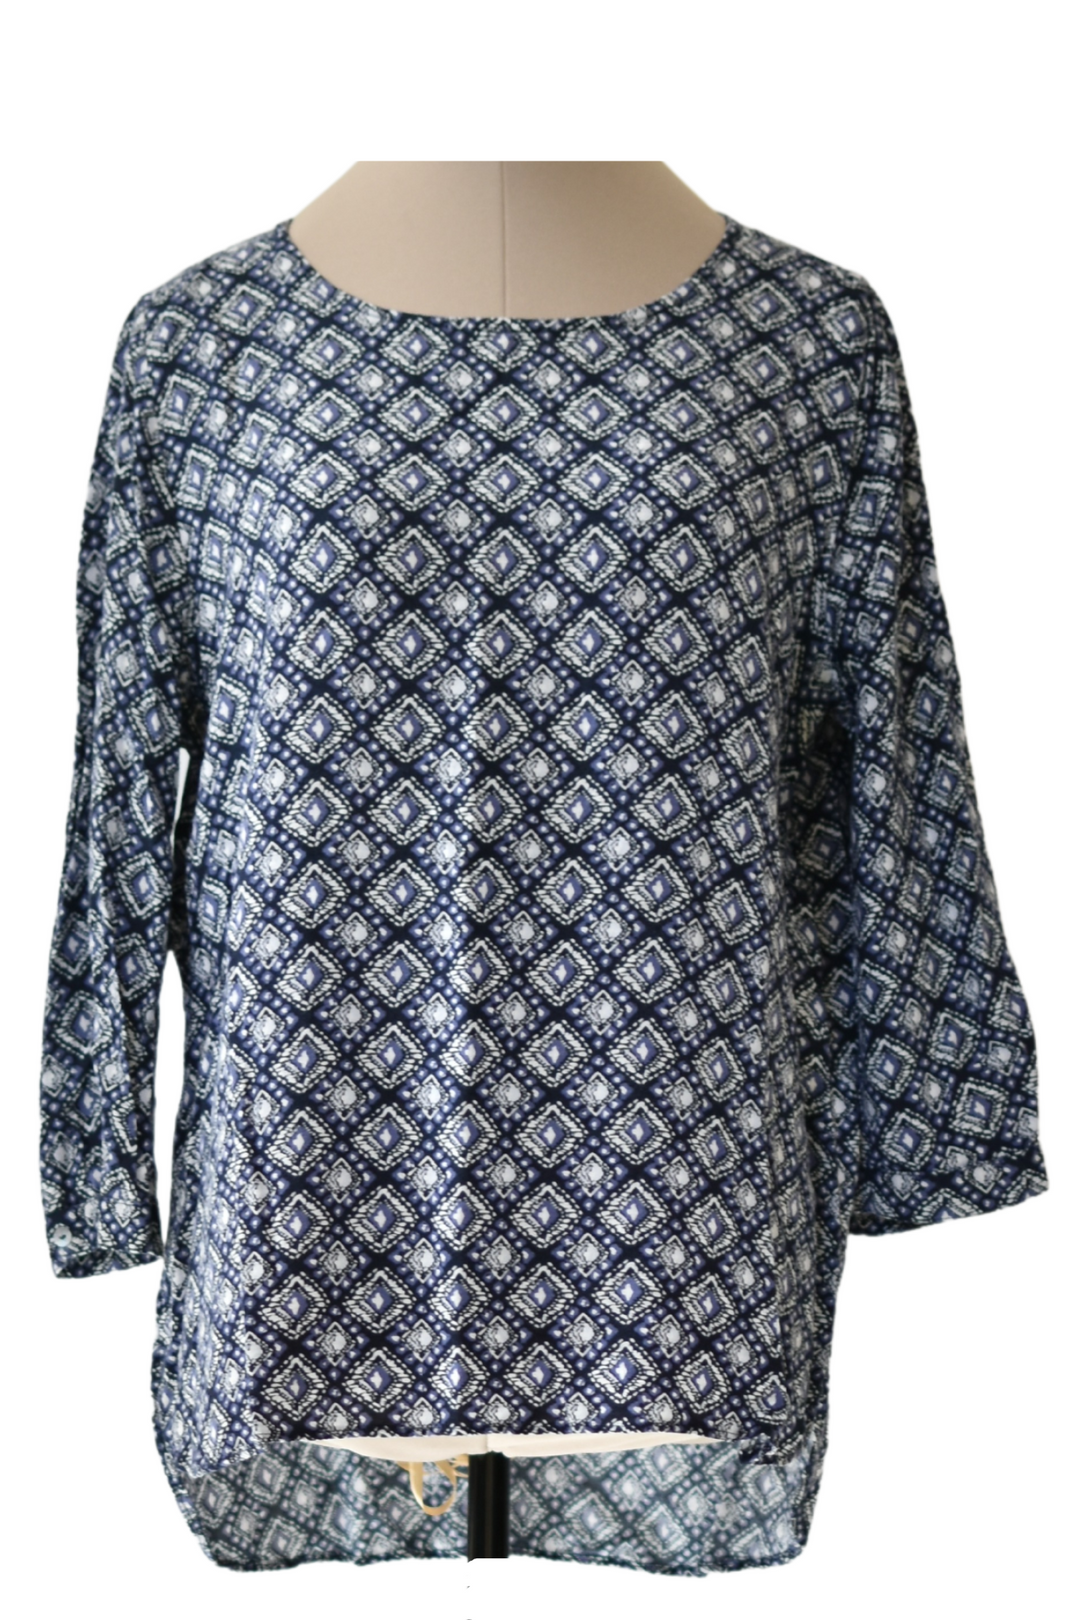 Navy & White Patterned Blouse